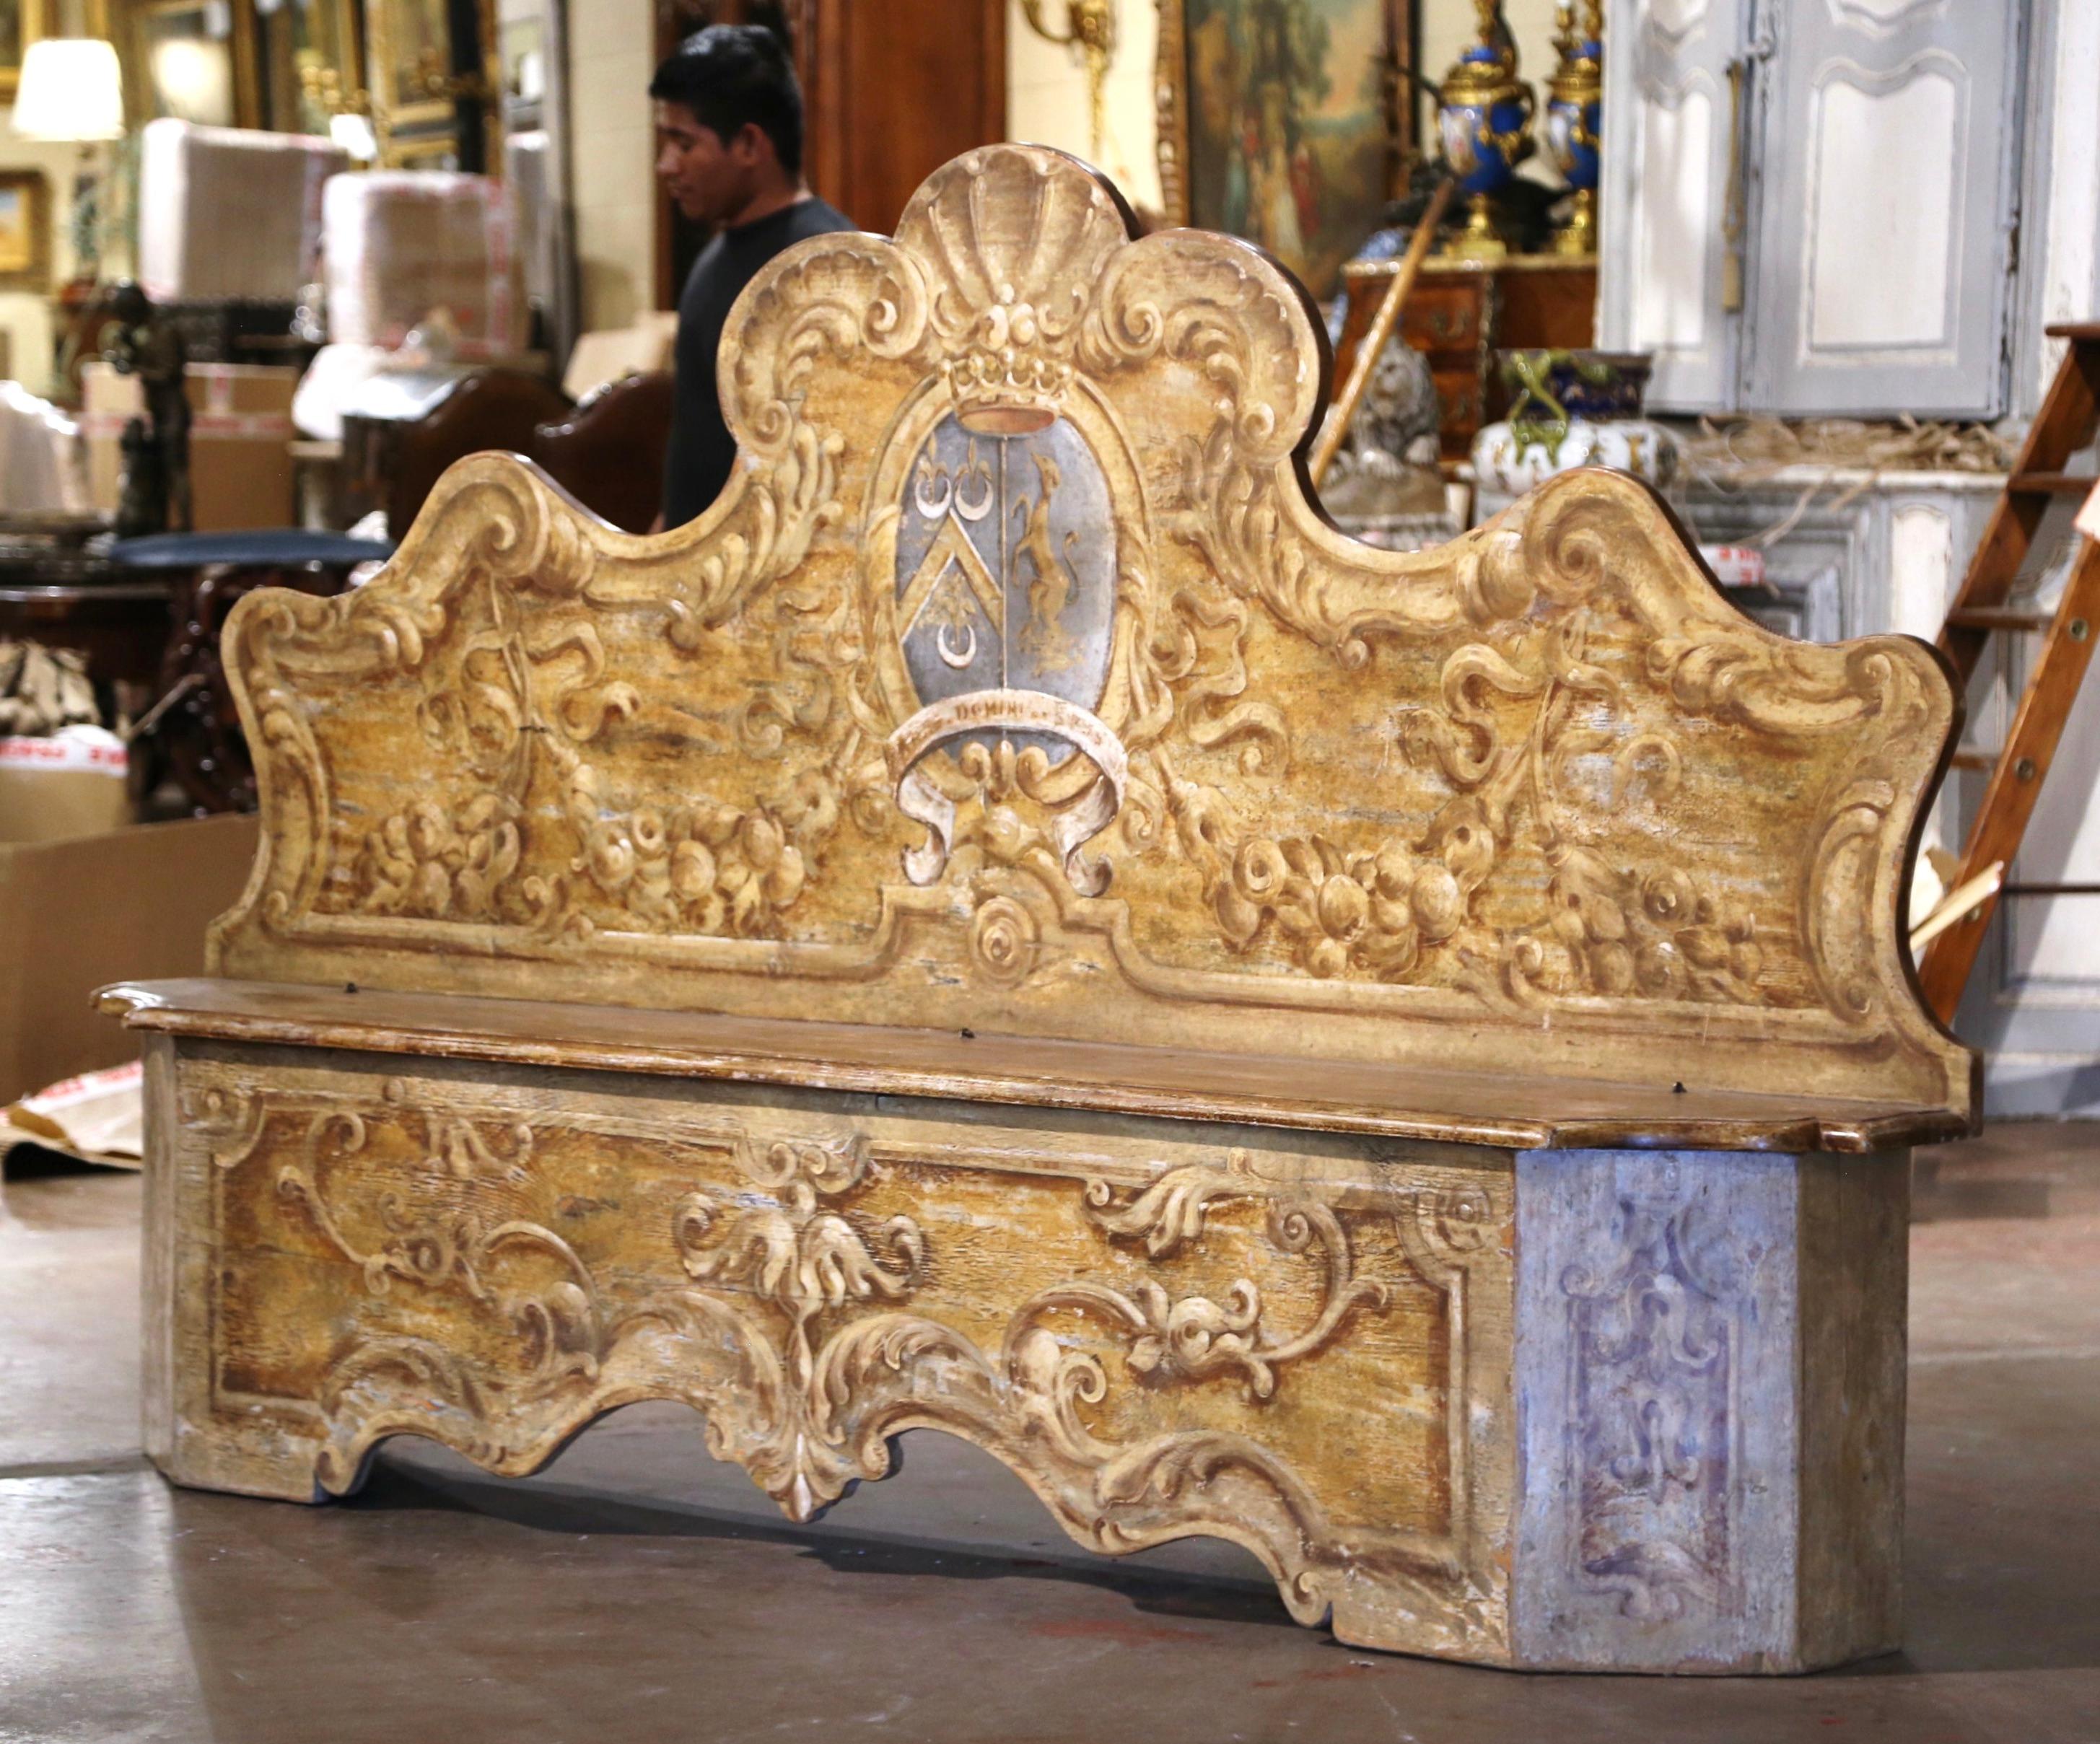 Add Italian visual drama into your home with this elegant and colorful Cassapanca bench. Crafted in Italy, circa 1960, the carved bench features a tall back and apron decorated with intricately scalloped edges. The seating is further embellished